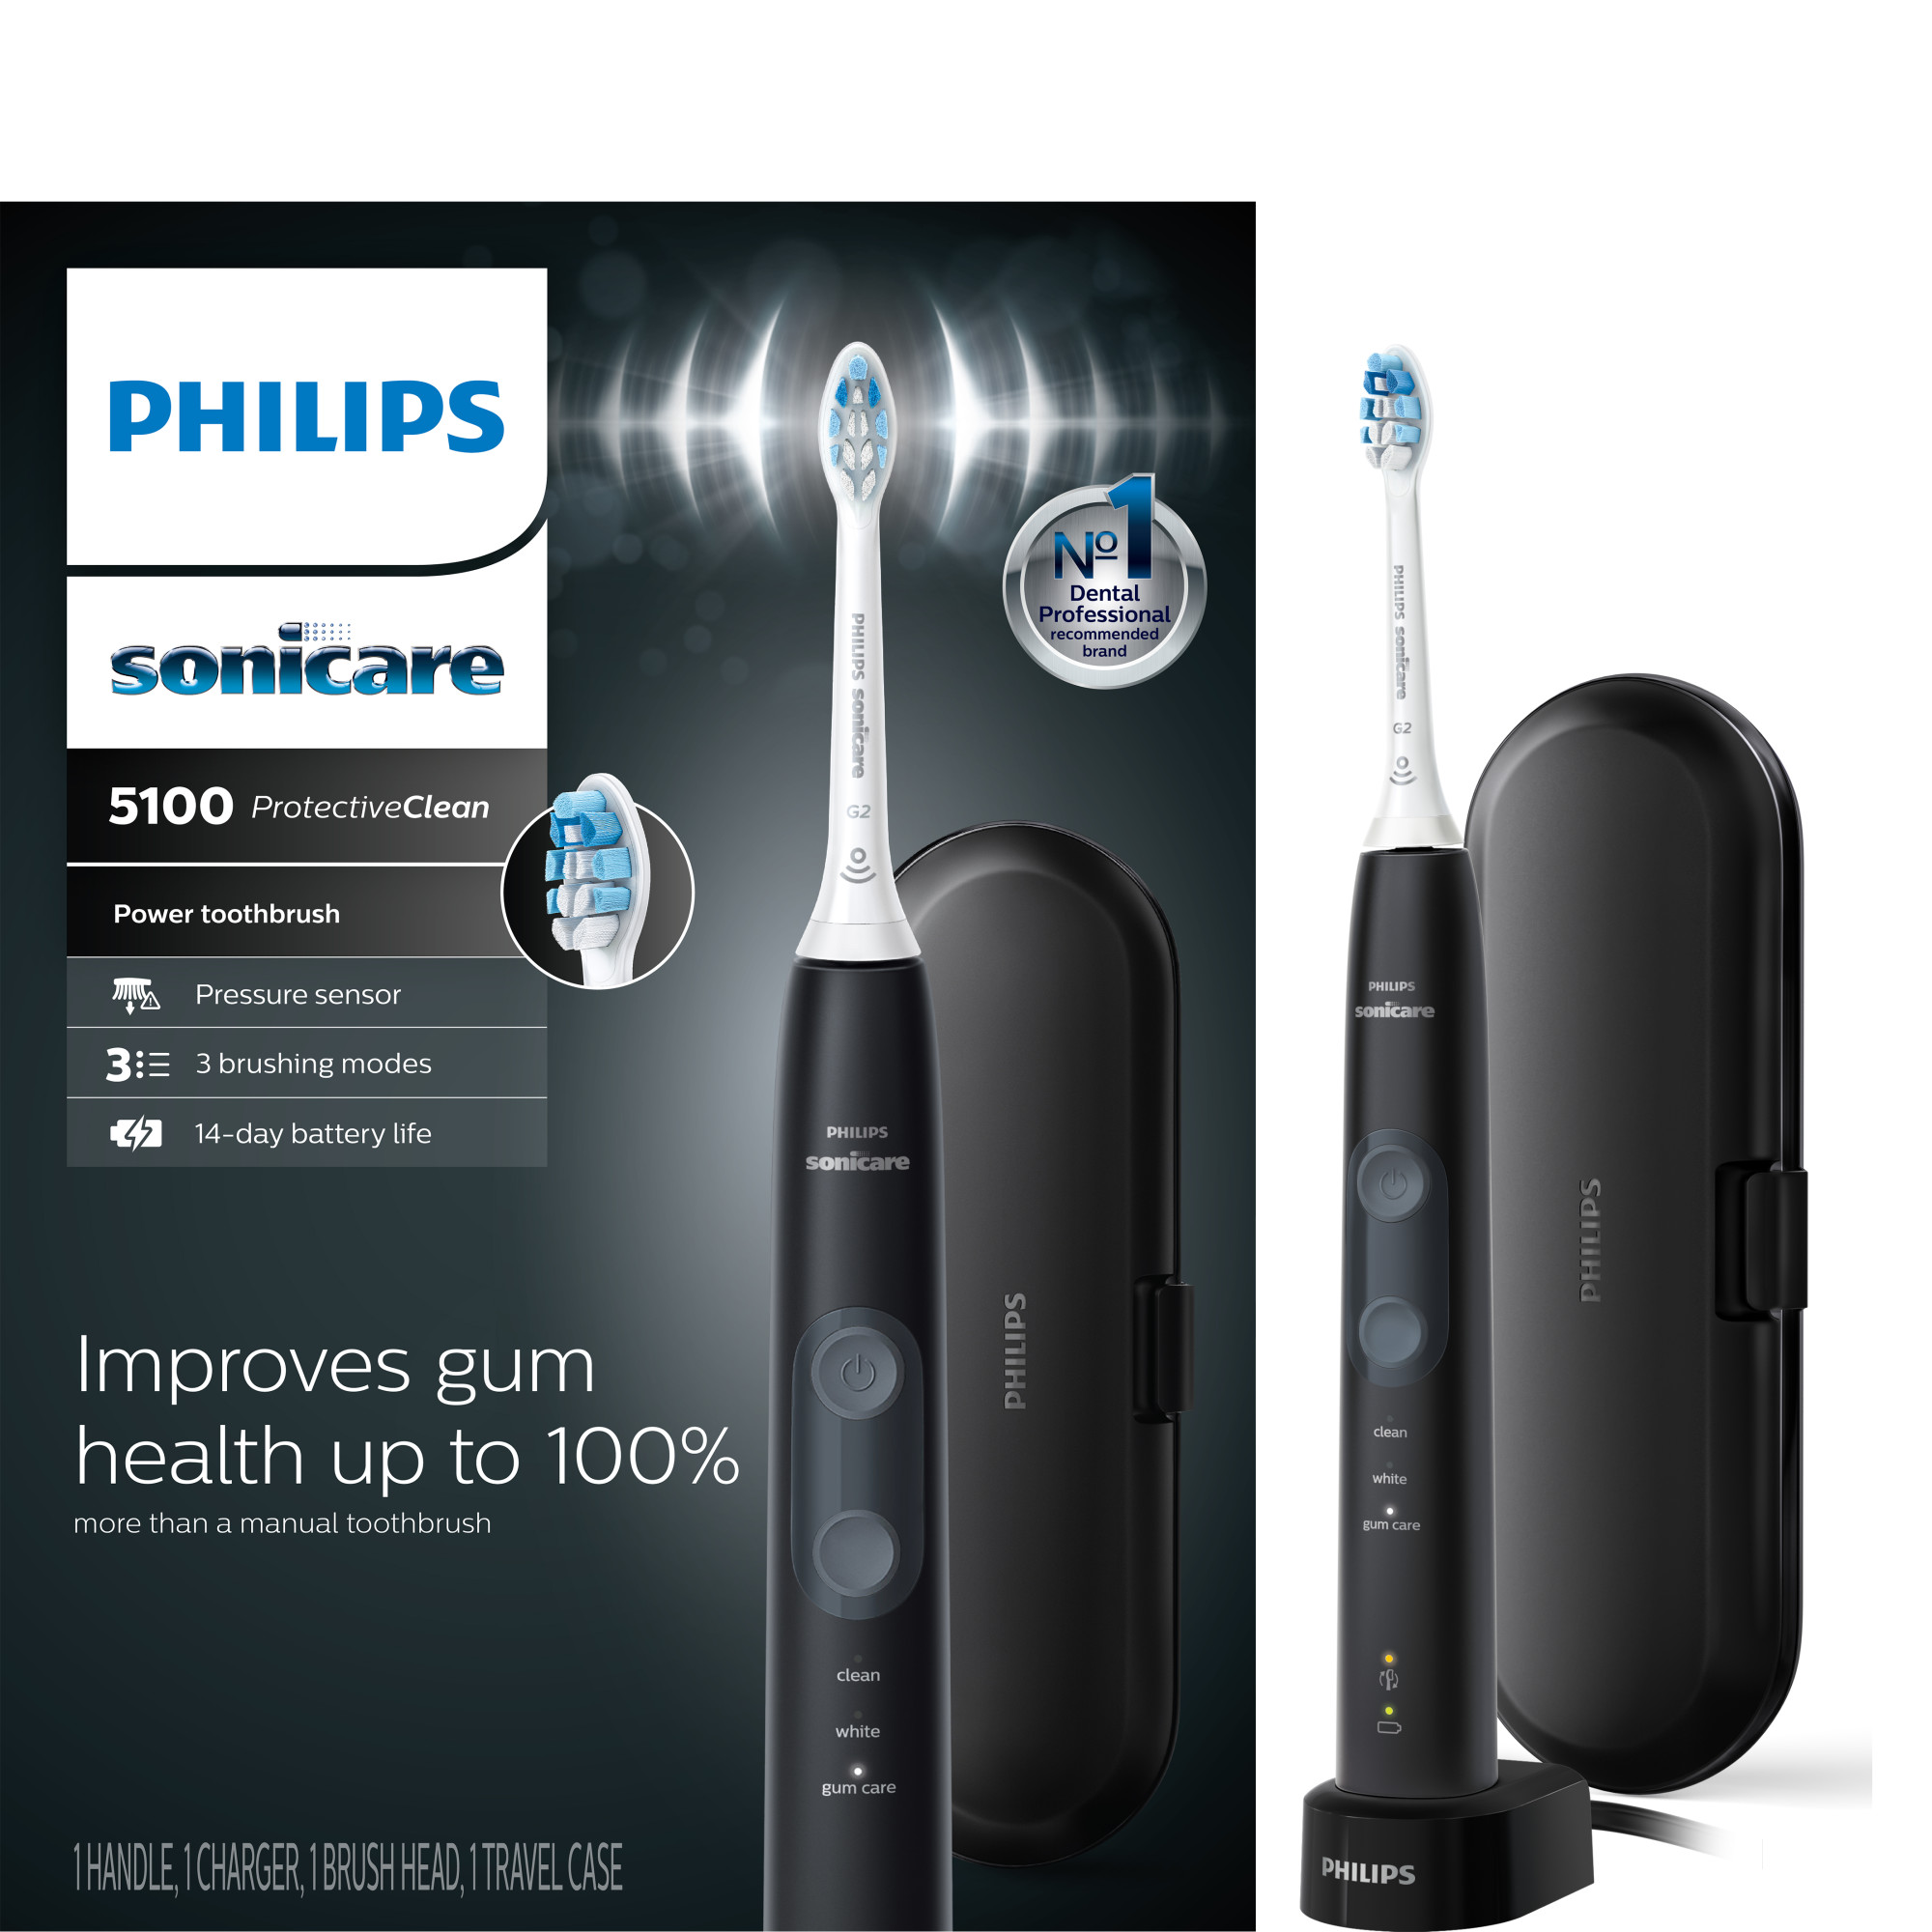 Philips Sonicare ProtectiveClean 5100 Rechargeable Electric Toothbrush, Black Hx6850/60 - image 1 of 5